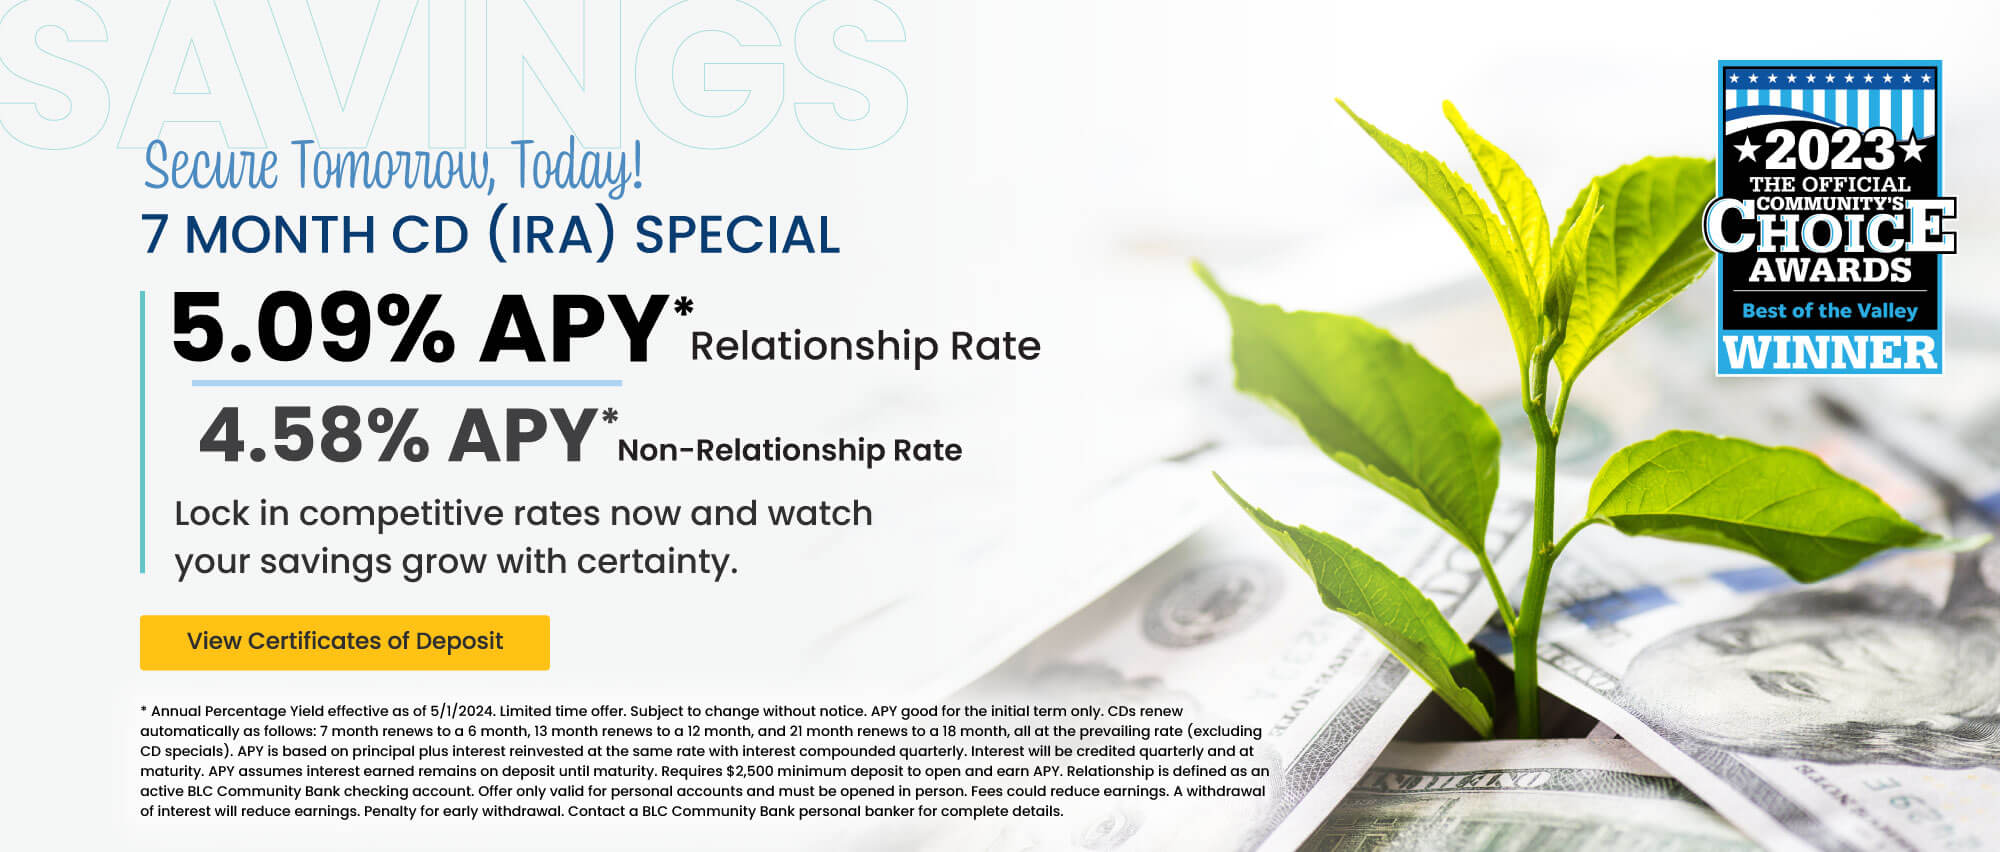 Secure Tomorrow, Today! 7 month CD (IRA) 5.09% APY* relationship rate 4.58% apy* non-relationship rate.  Click here to view certificates of deposit for details.